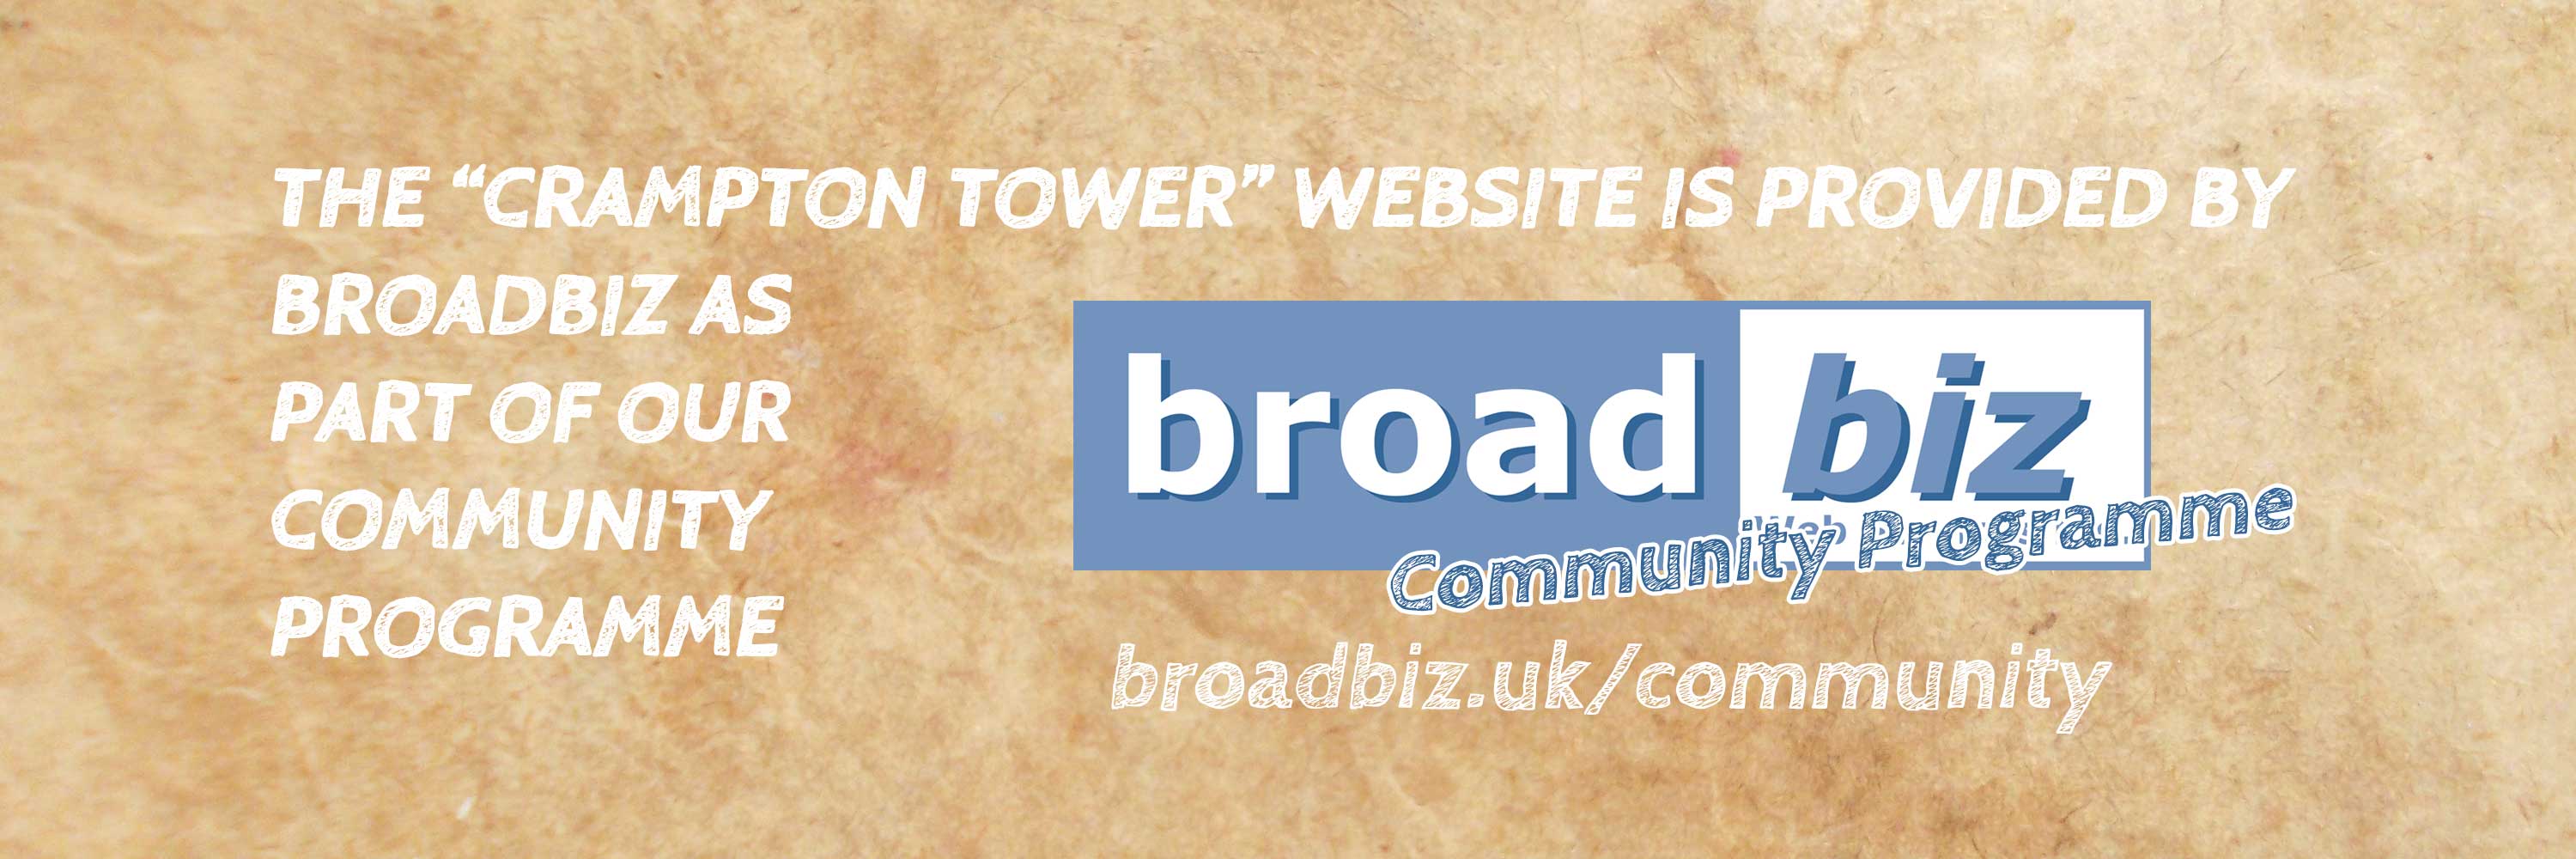 The Crampton Tower website is provided by Broadbiz as part of our Community Programme